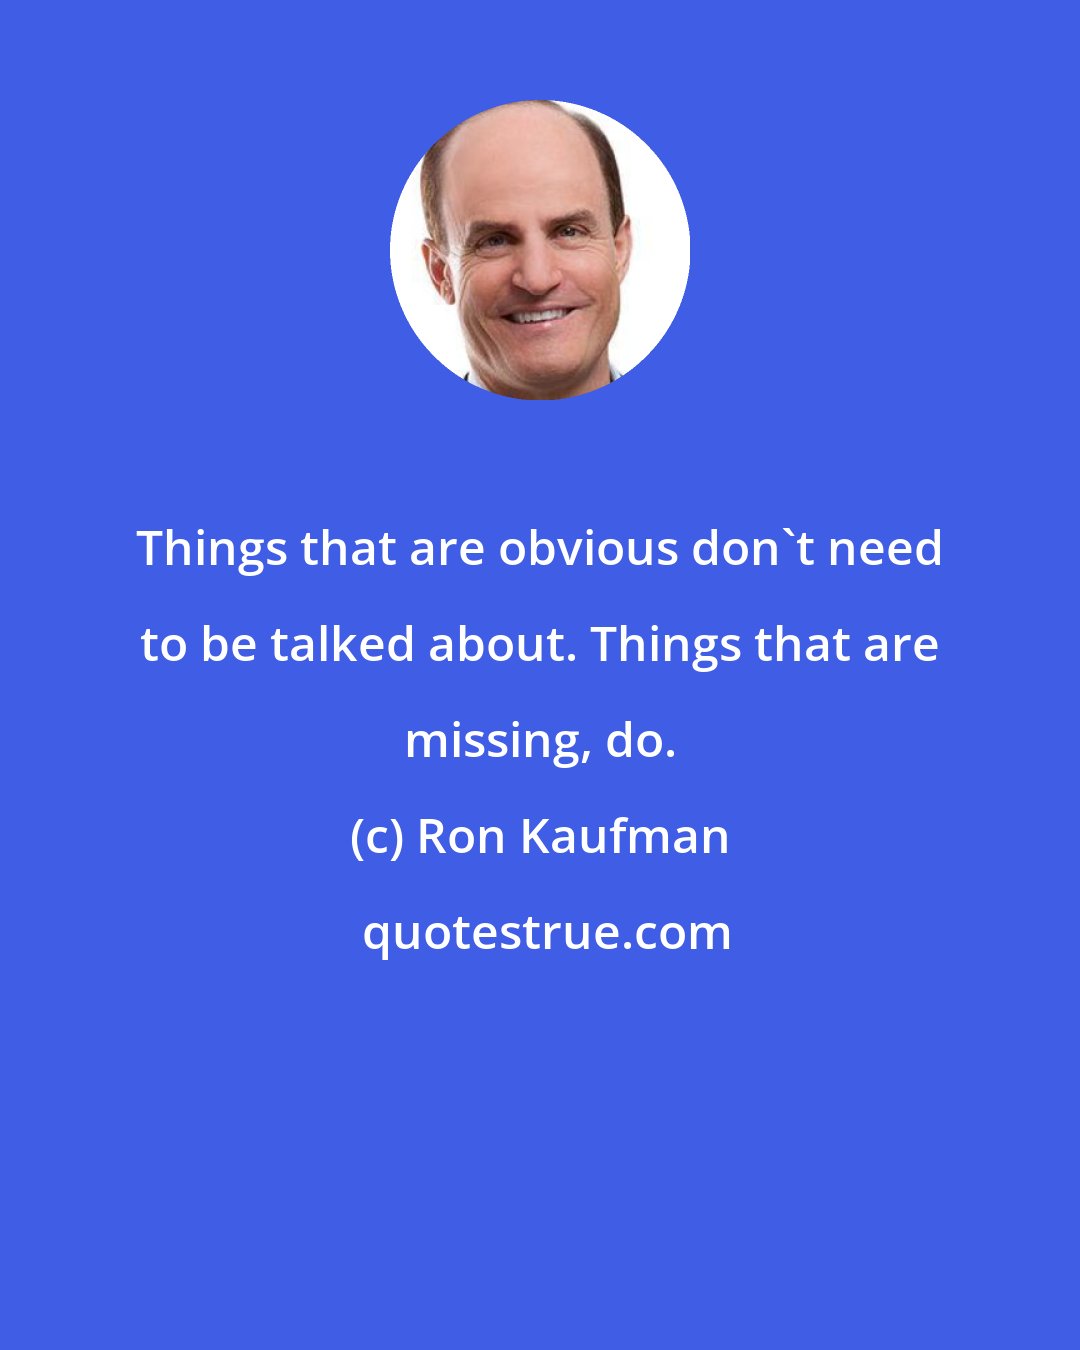 Ron Kaufman: Things that are obvious don't need to be talked about. Things that are missing, do.